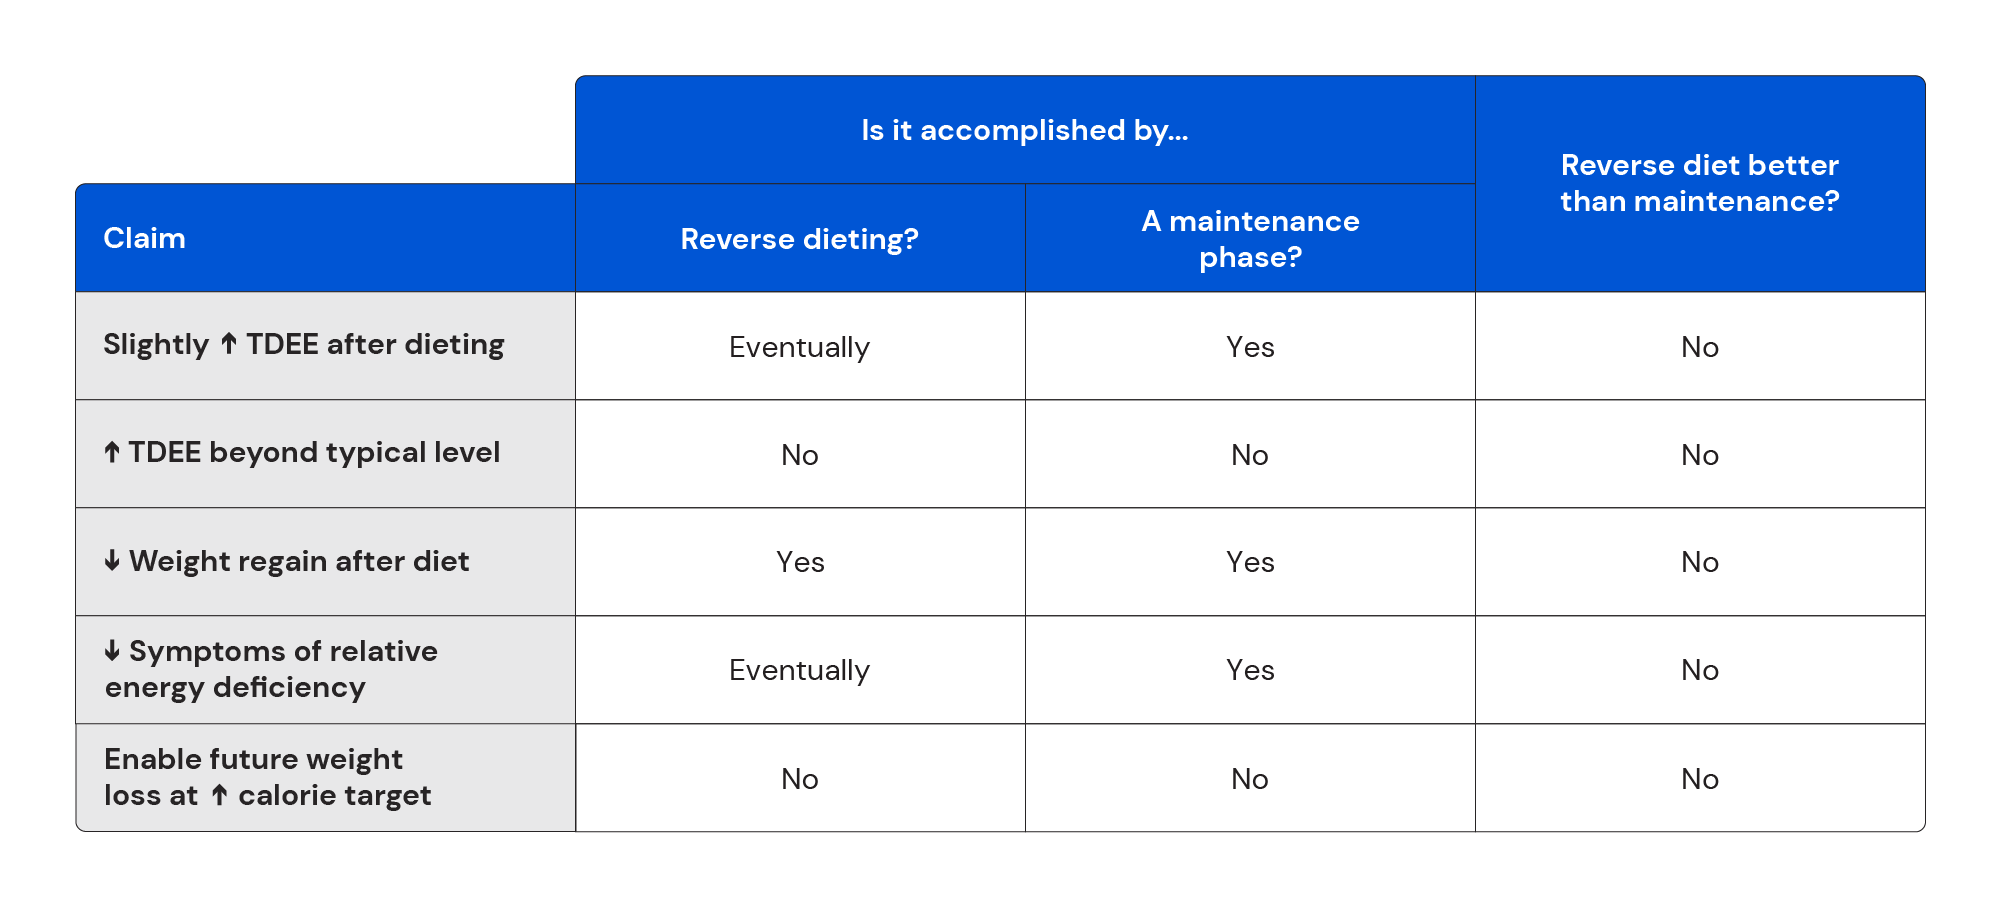 Reverse dieting versus a maintenance phase chart